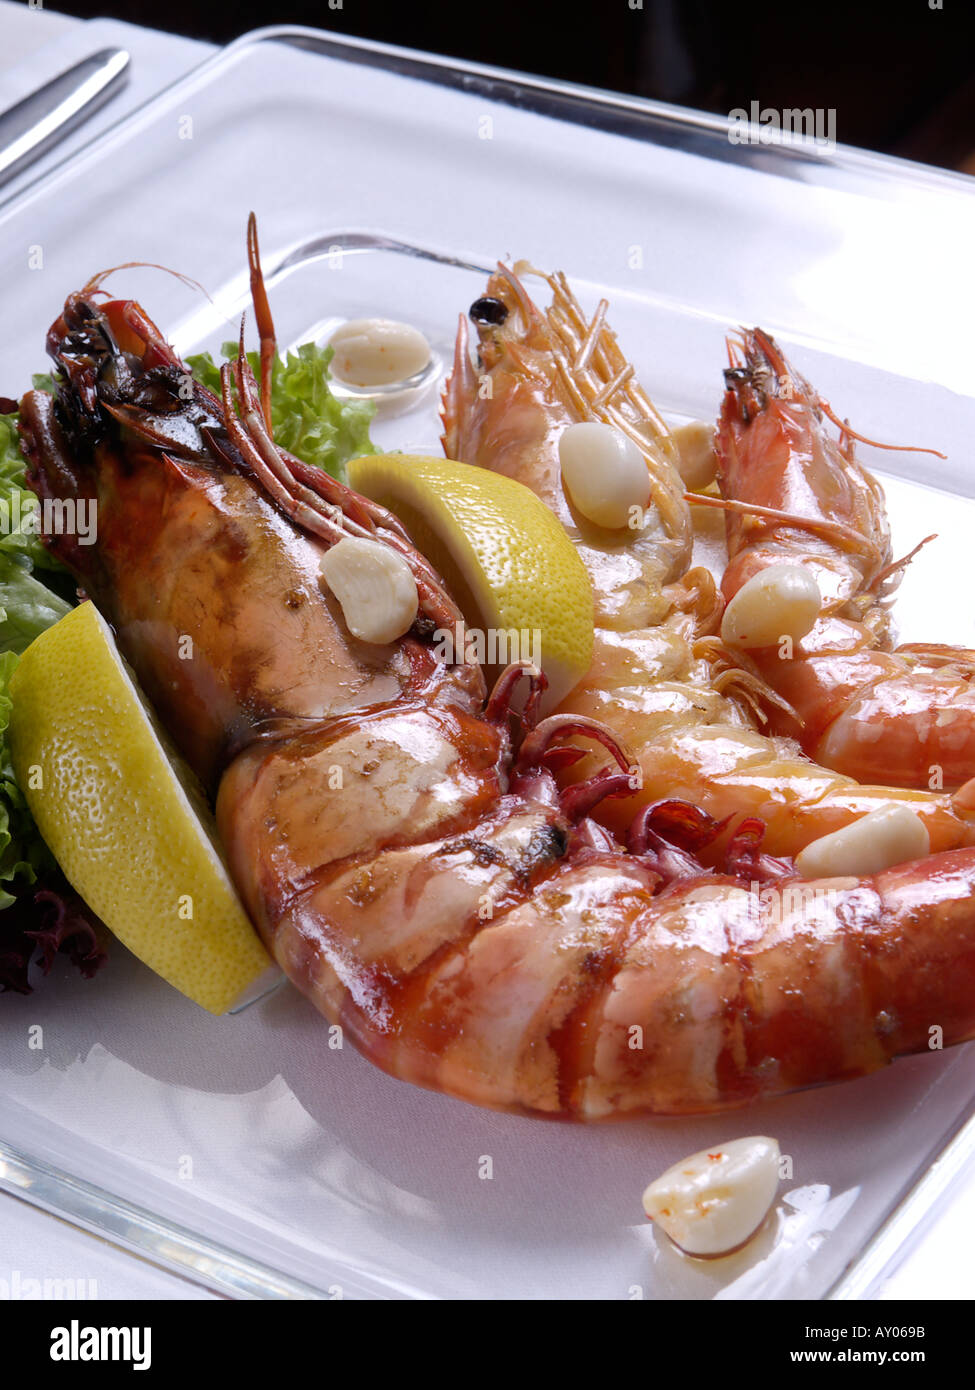 Three different sizes of gamba on a glass plate with lemon and garlic Stock Photo